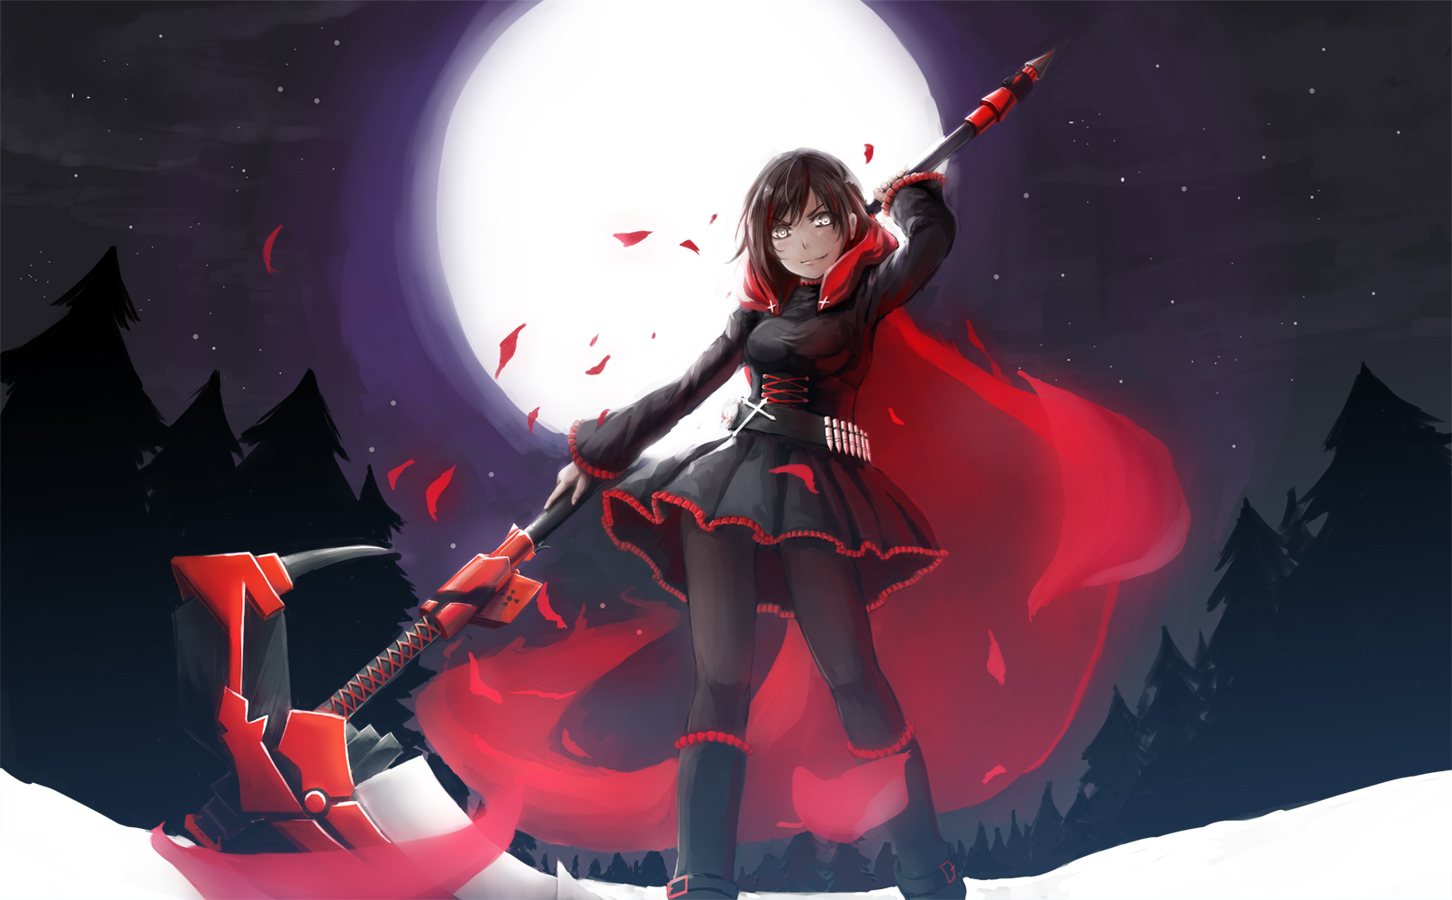 Free download Ruby Rose RWBY wallpaper Anime wallpapers 42054 [1280x800]  for your Desktop, Mobile & Tablet | Explore 48+ Ruby Rose RWBY Wallpaper |  Cool RWBY Wallpapers, RWBY Phone Wallpaper, RWBY Nora Wallpaper